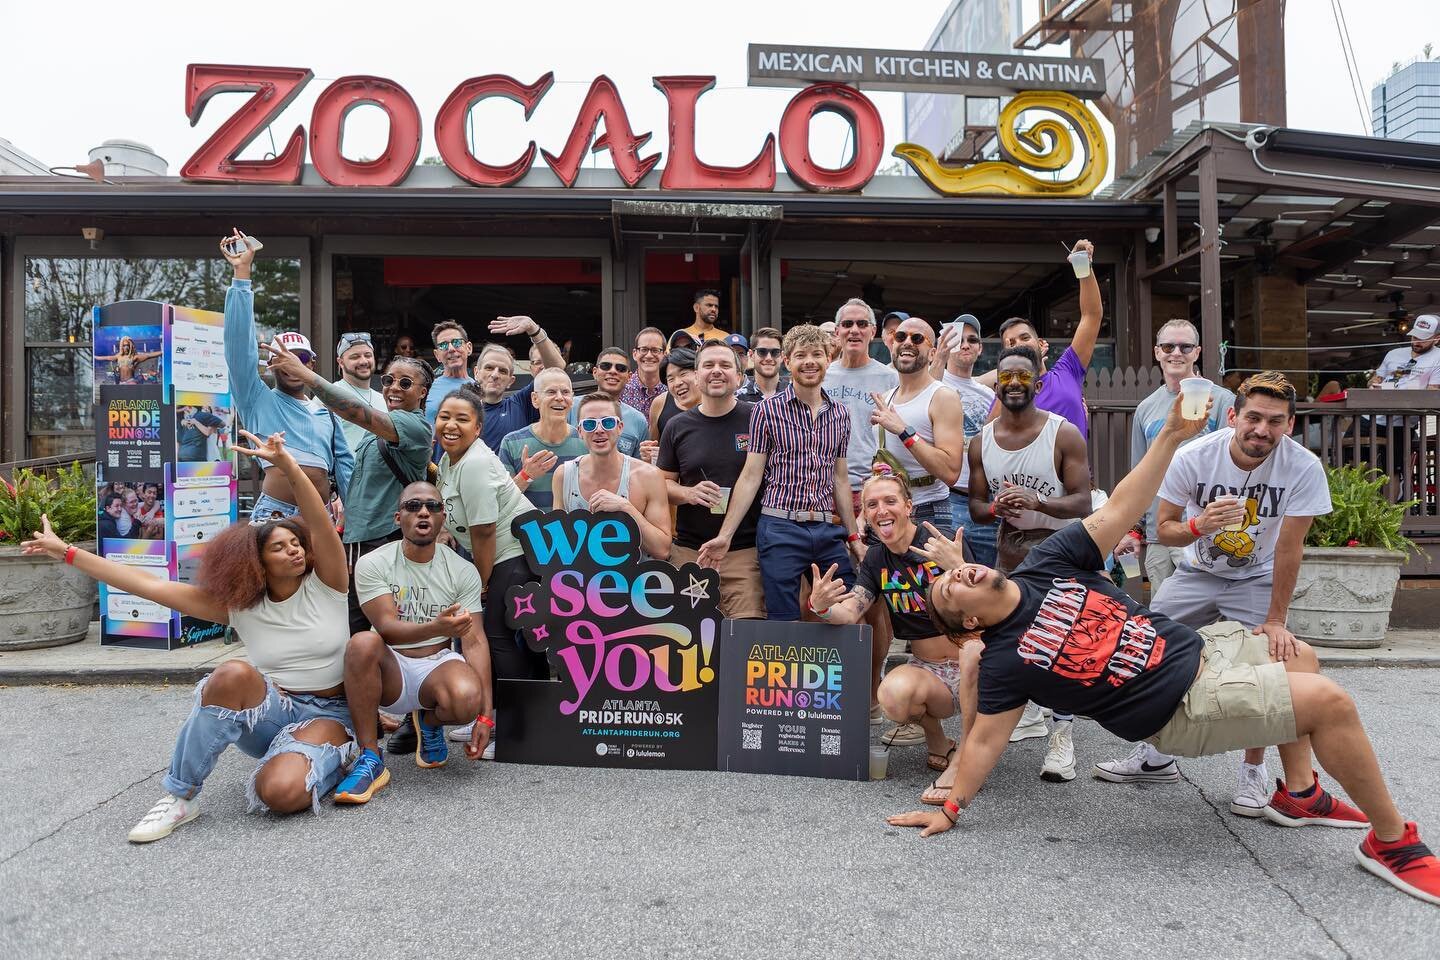 More pics from our @zocaloatl Margarita Bust this past weekend where we raised MORE THAN $1,000 for Atlanta Pride Run Powered by @lululemon. 

Sign up now at the link in Bio!